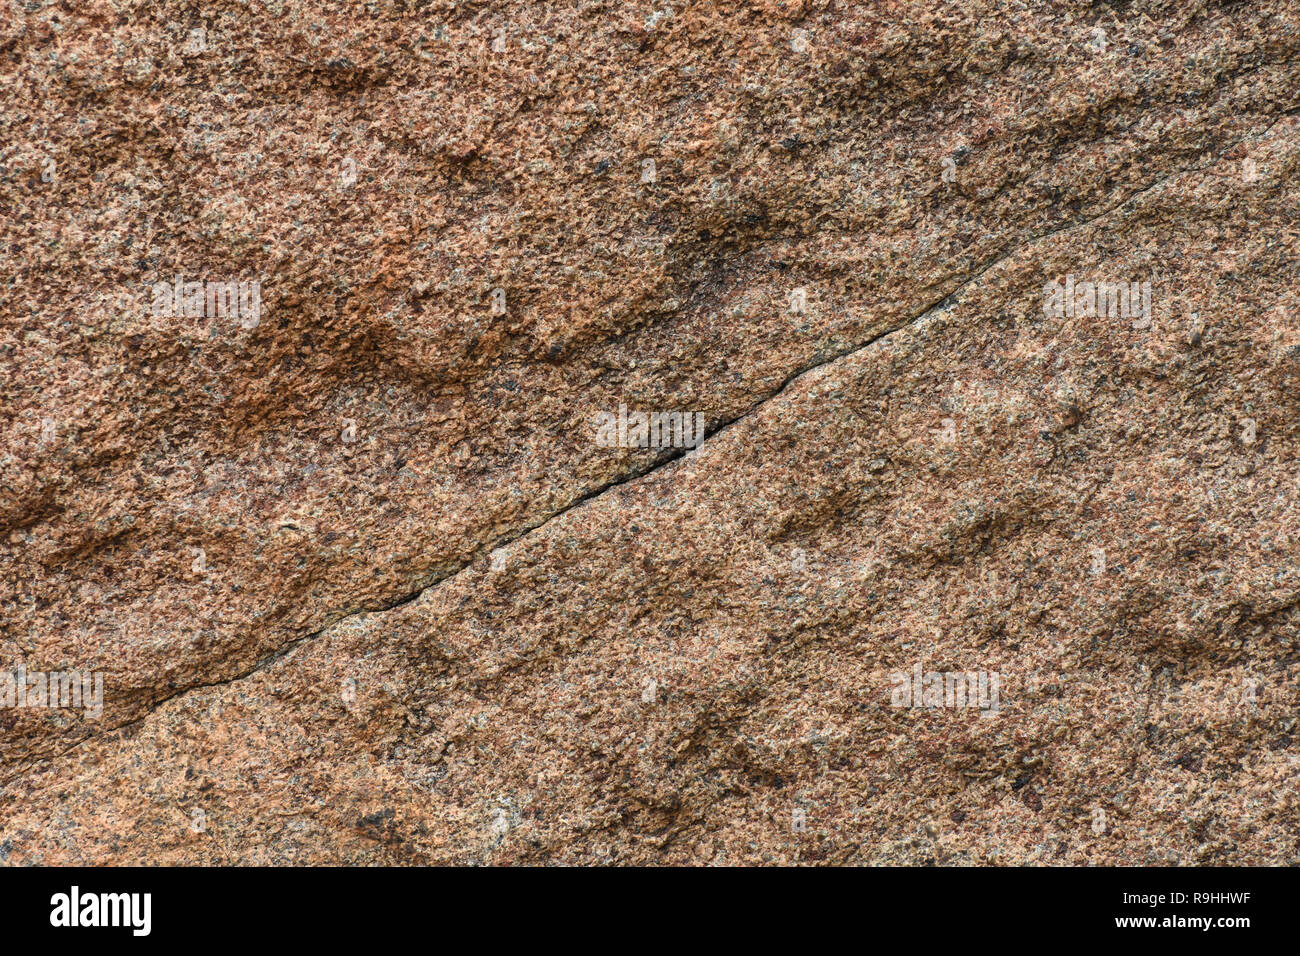 Natural Granite Rock Face Surface With Fissure Stock Photo